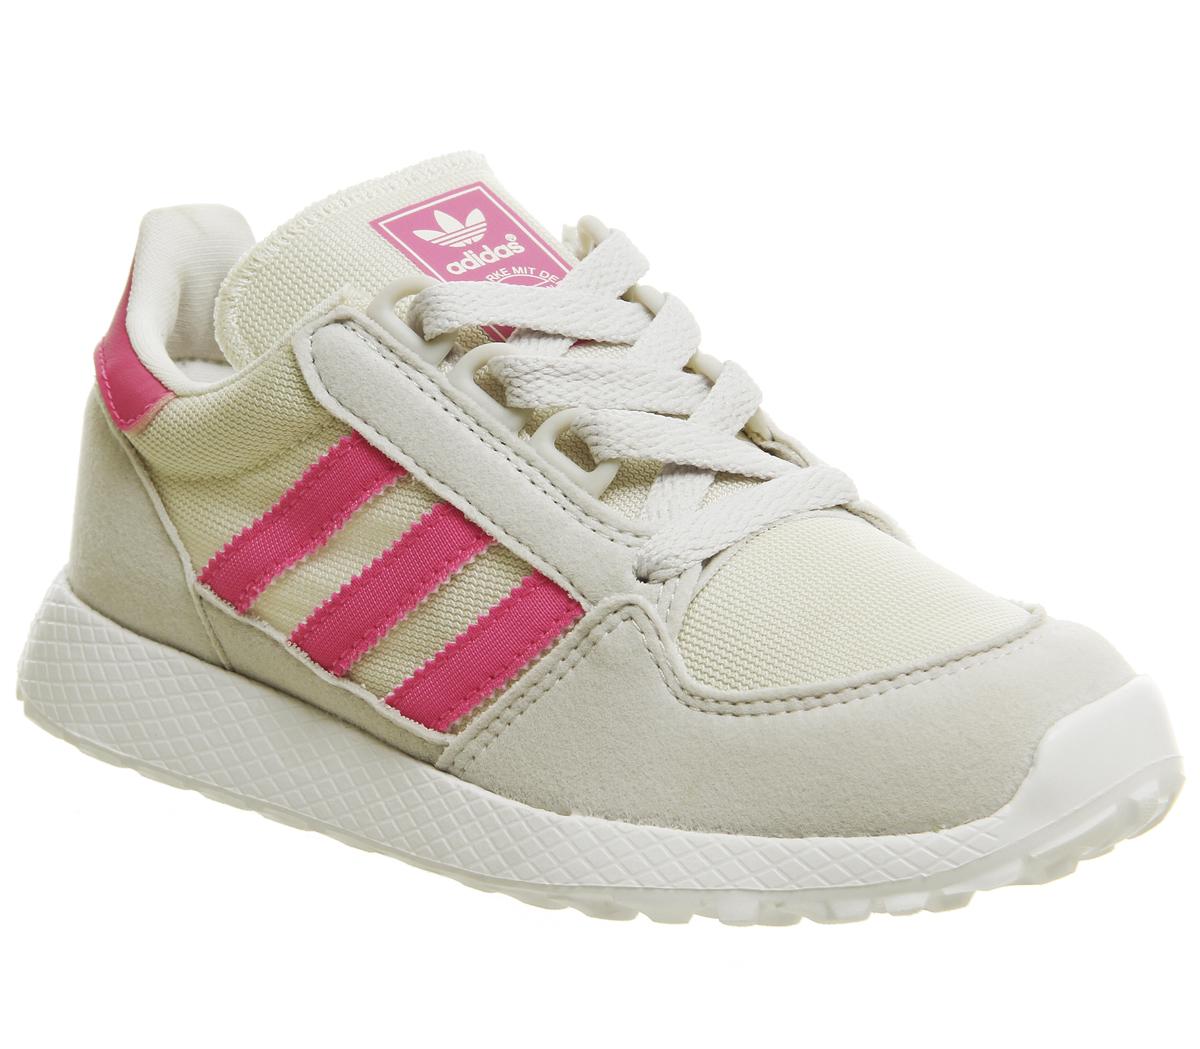 pink mesh adidas trainers